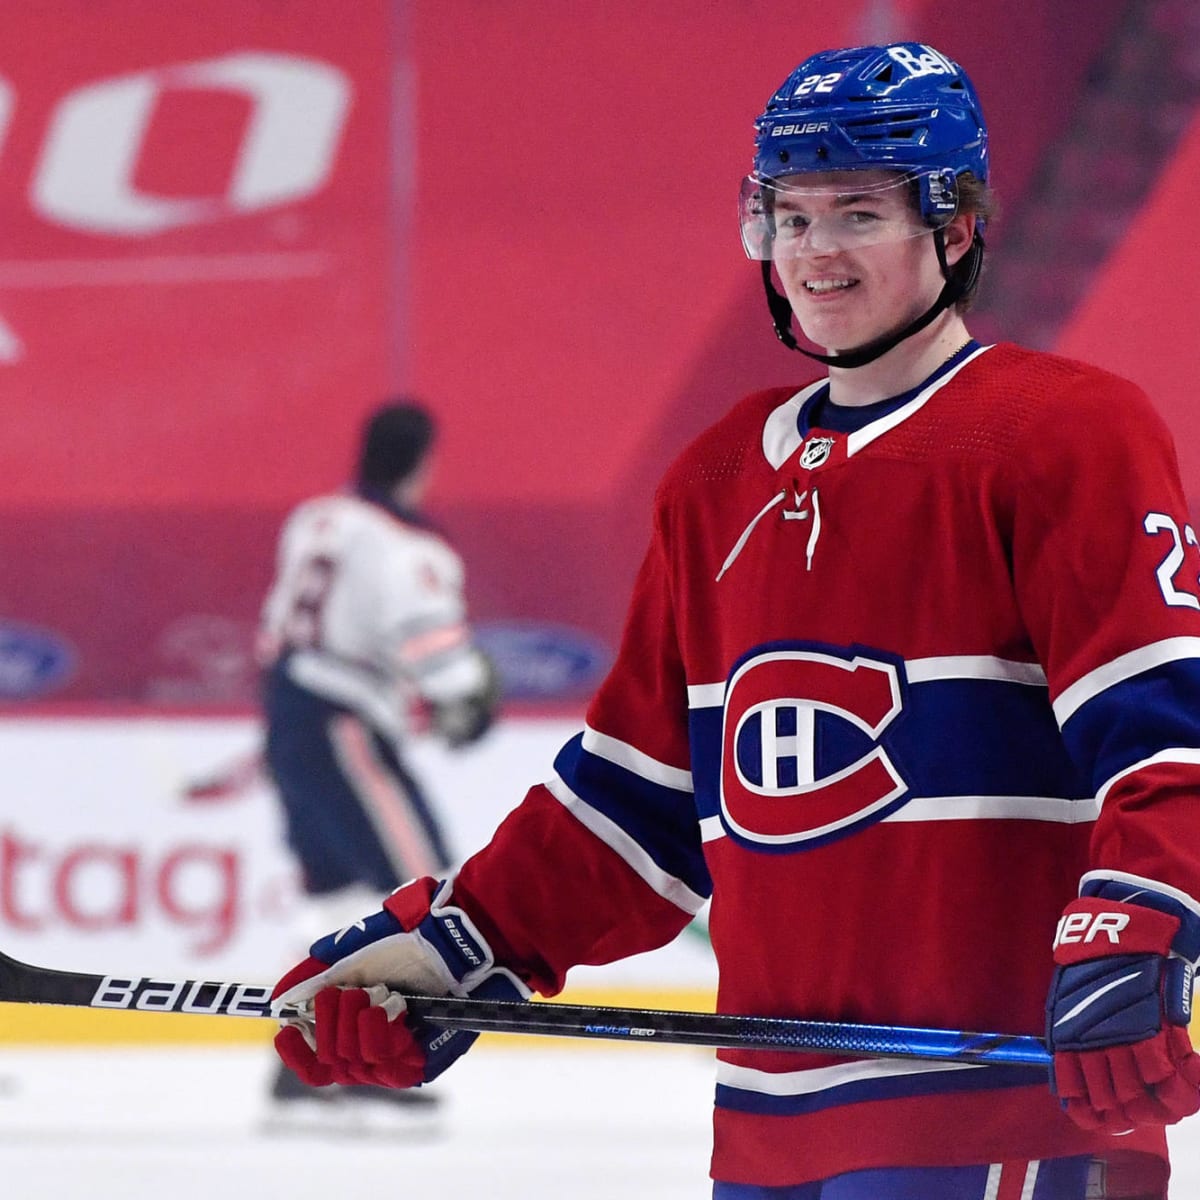 Watch: Cole Caufield hopes to be spark Canadiens need in playoff